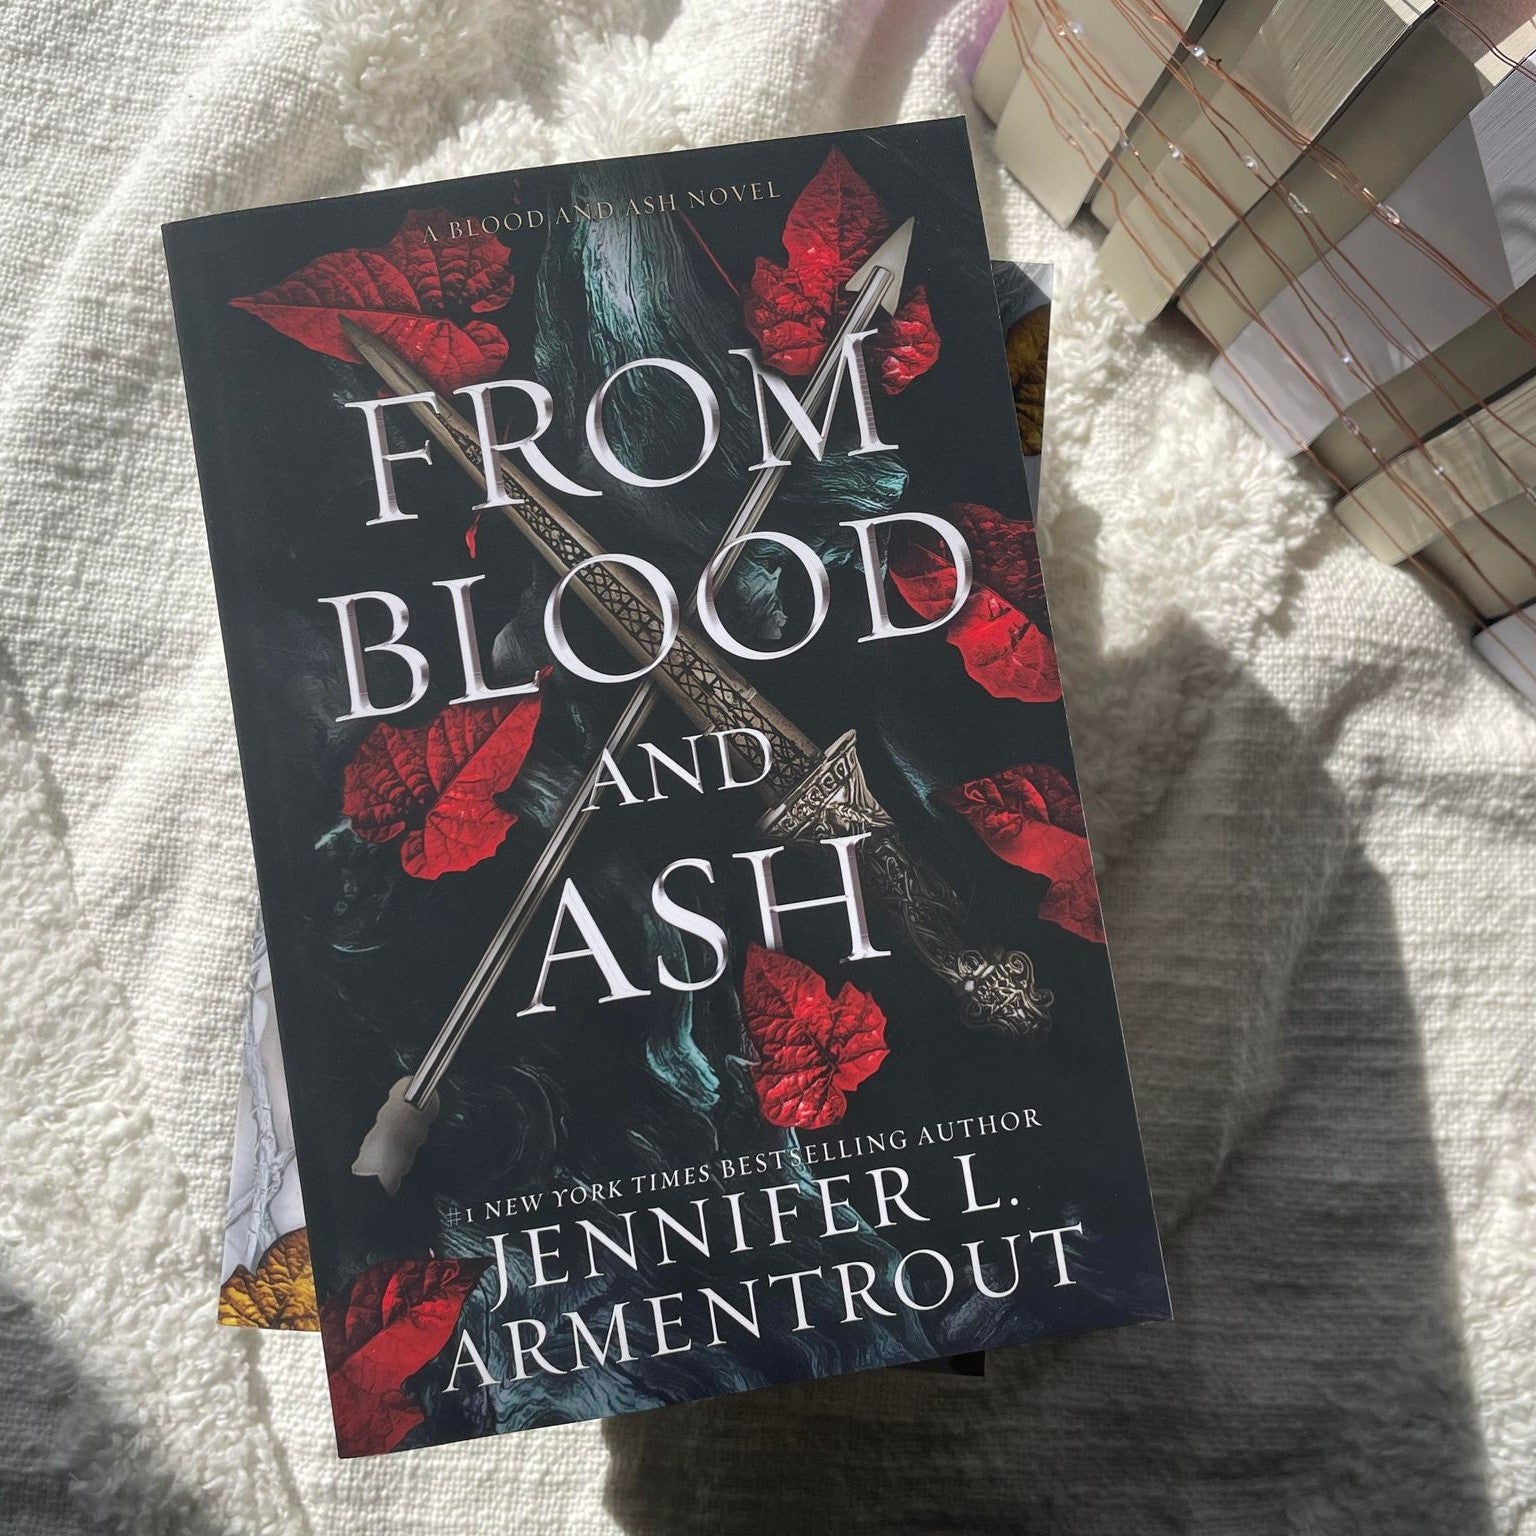 Blood And Ash series by Jennifer L. Armentrout